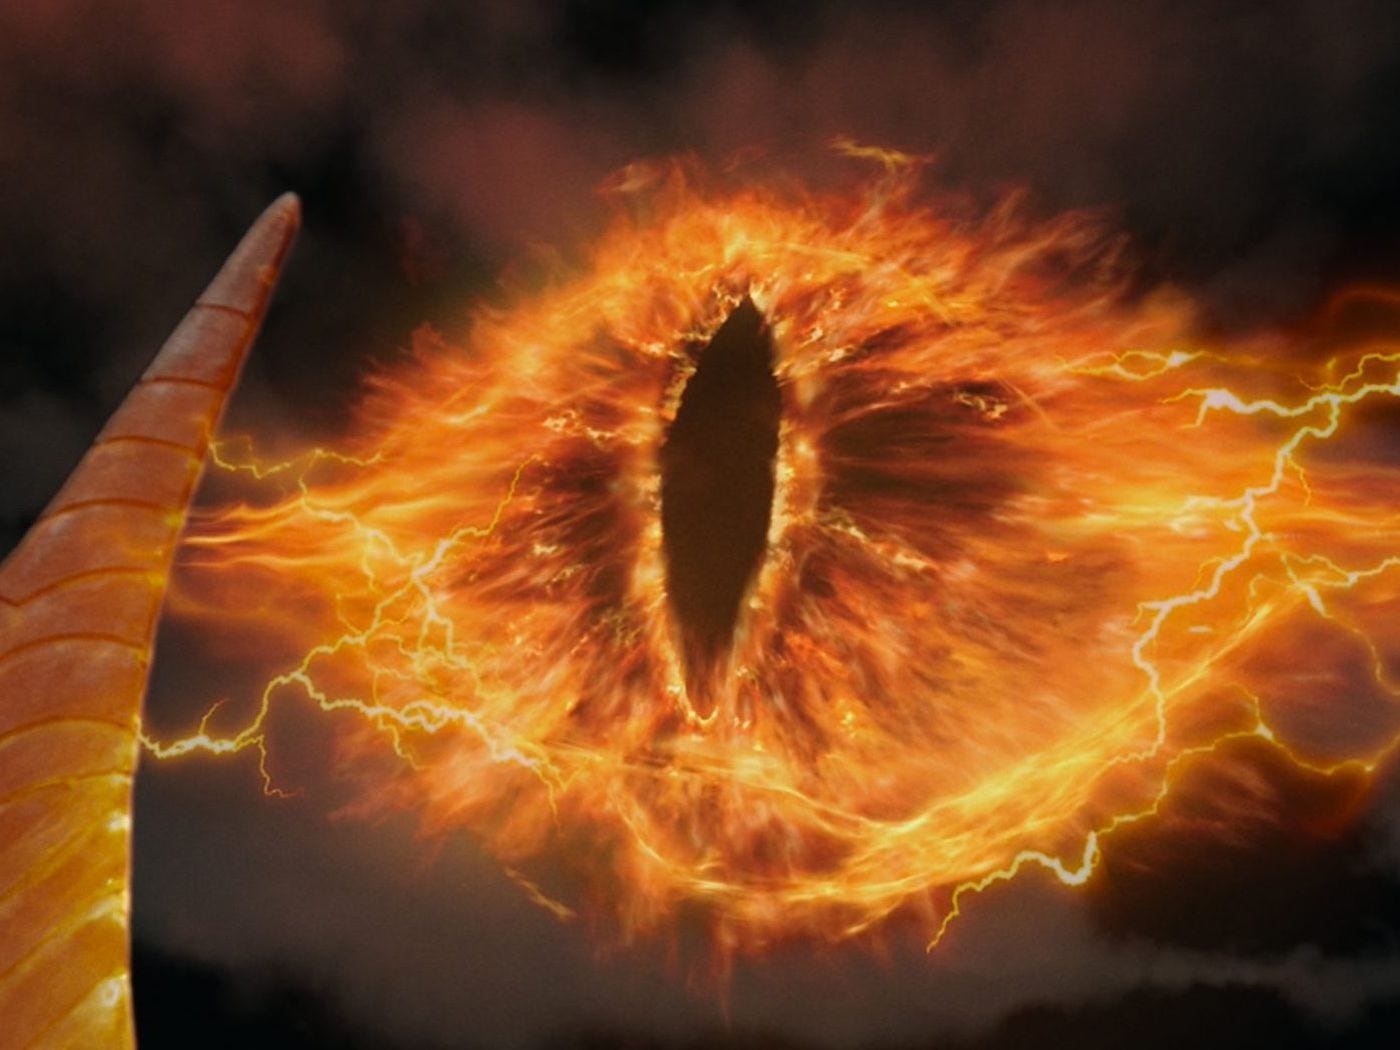 Lord of the Rings' Sauron eye, explained by cut Middle-earth lore - Polygon